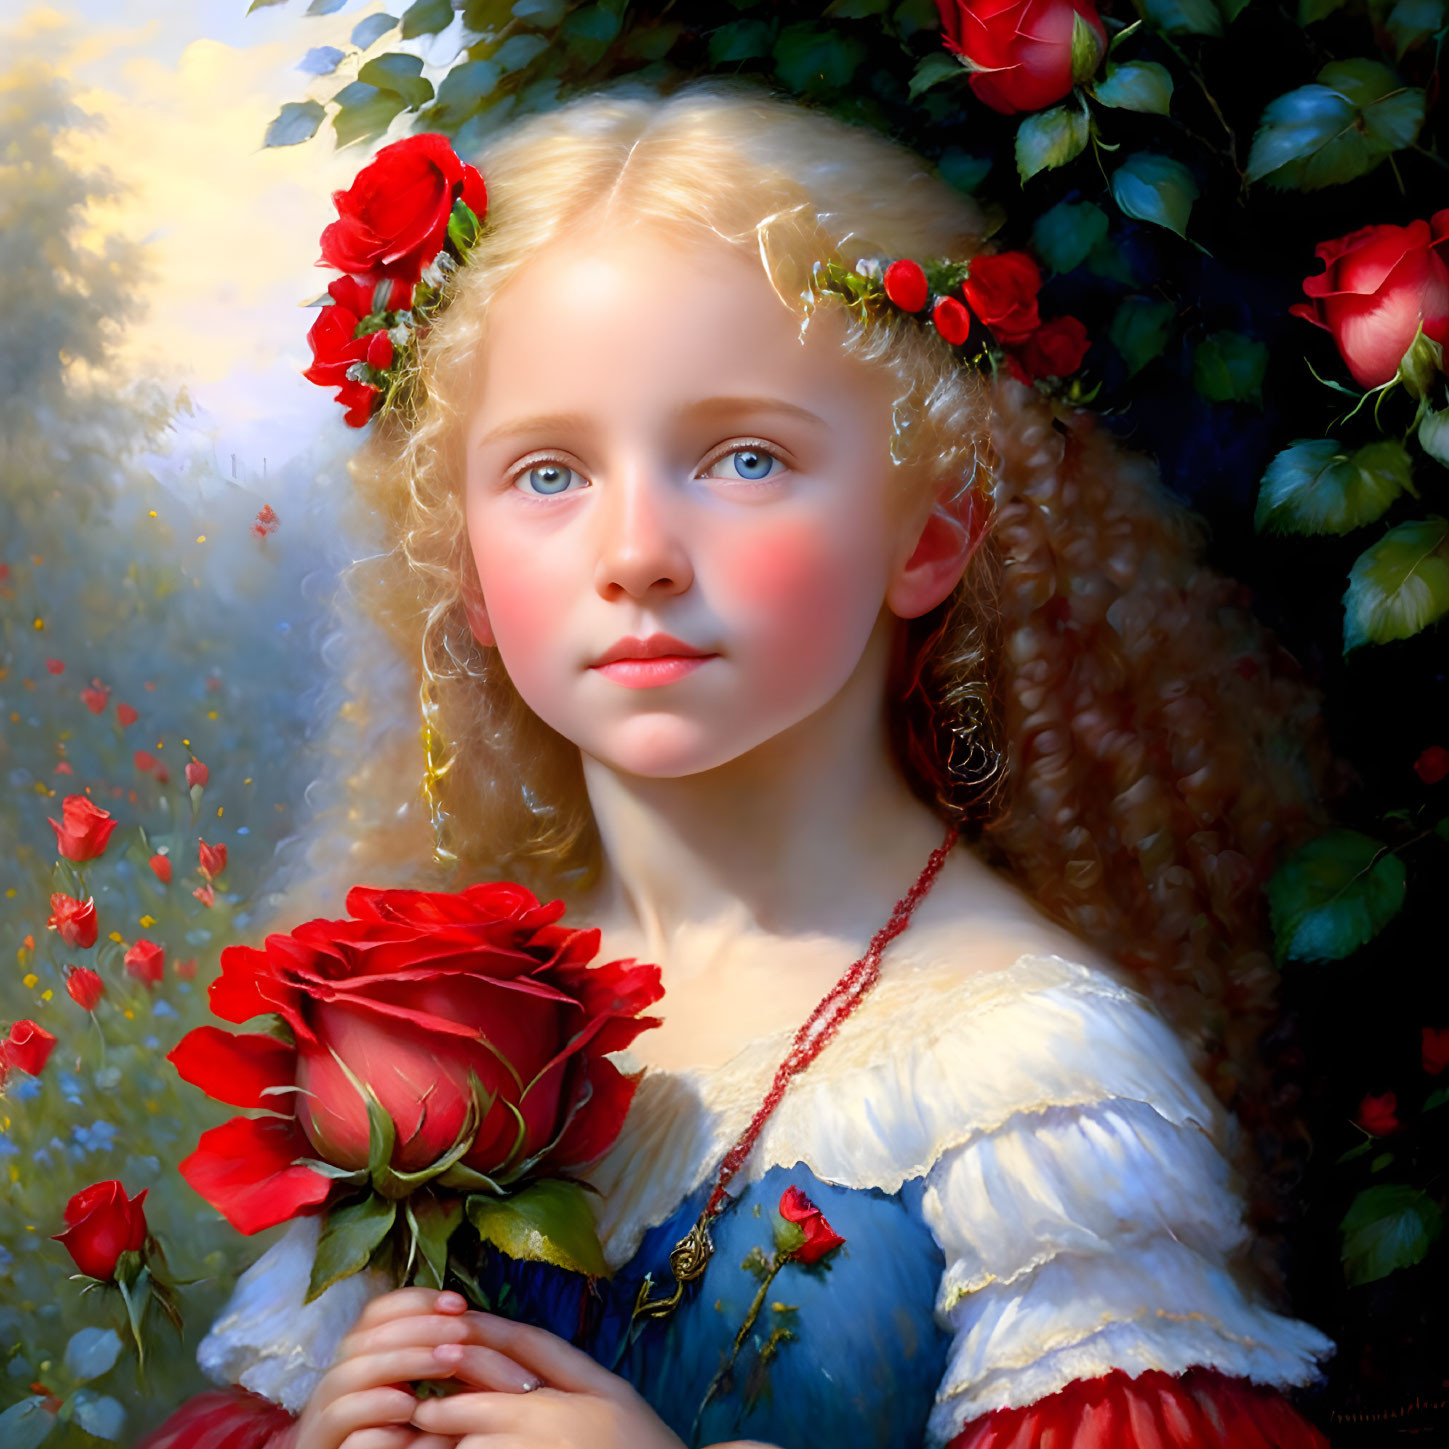 Portrait of Young Girl with Blue Eyes and Curly Hair Holding Red Roses Bouquet